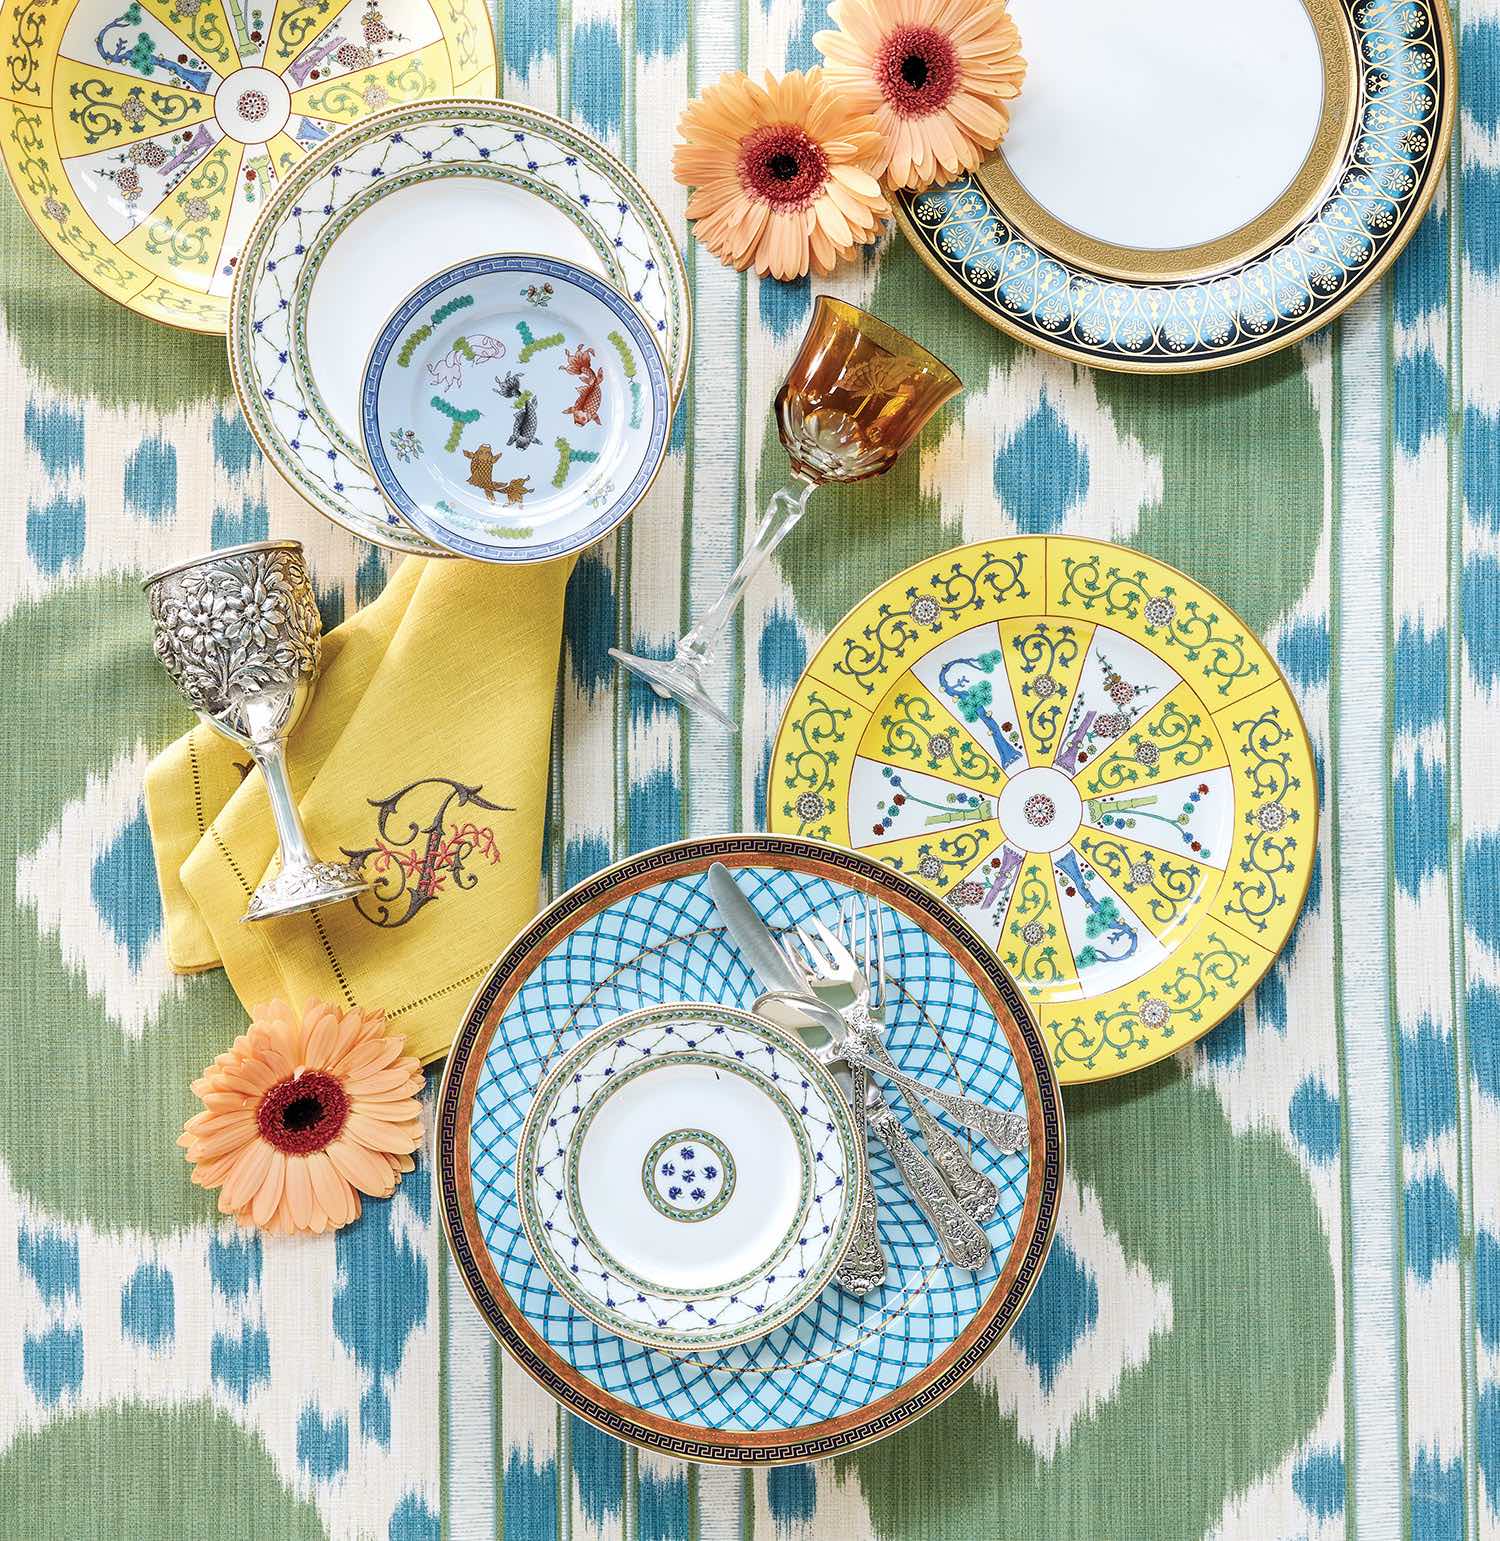 Alfresco dining calls for a summertime setting full of bright color and pattern.